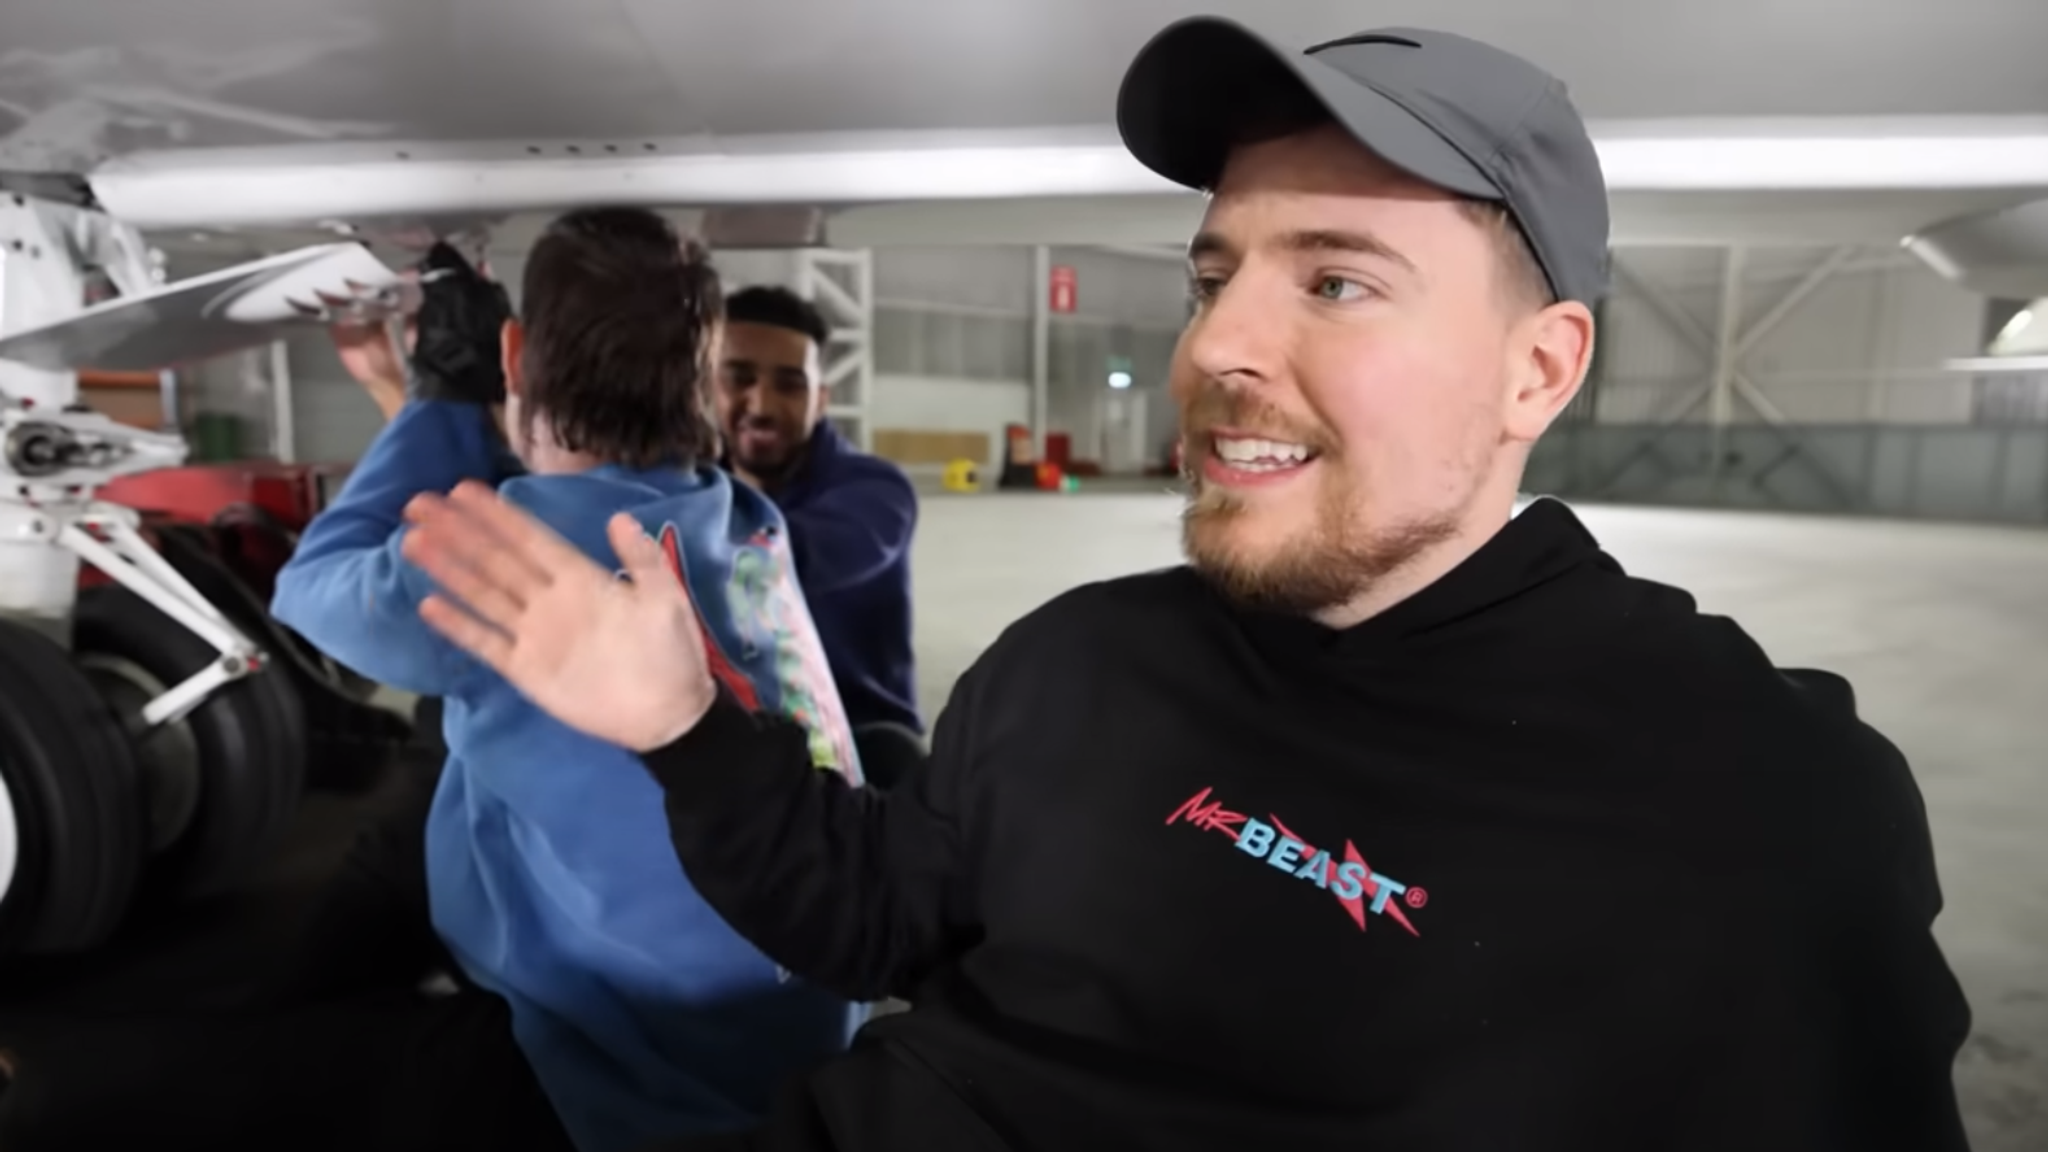 MrBeast has ended Pewdiepie's reign as the most-subscribed r - Life, mrbeast  